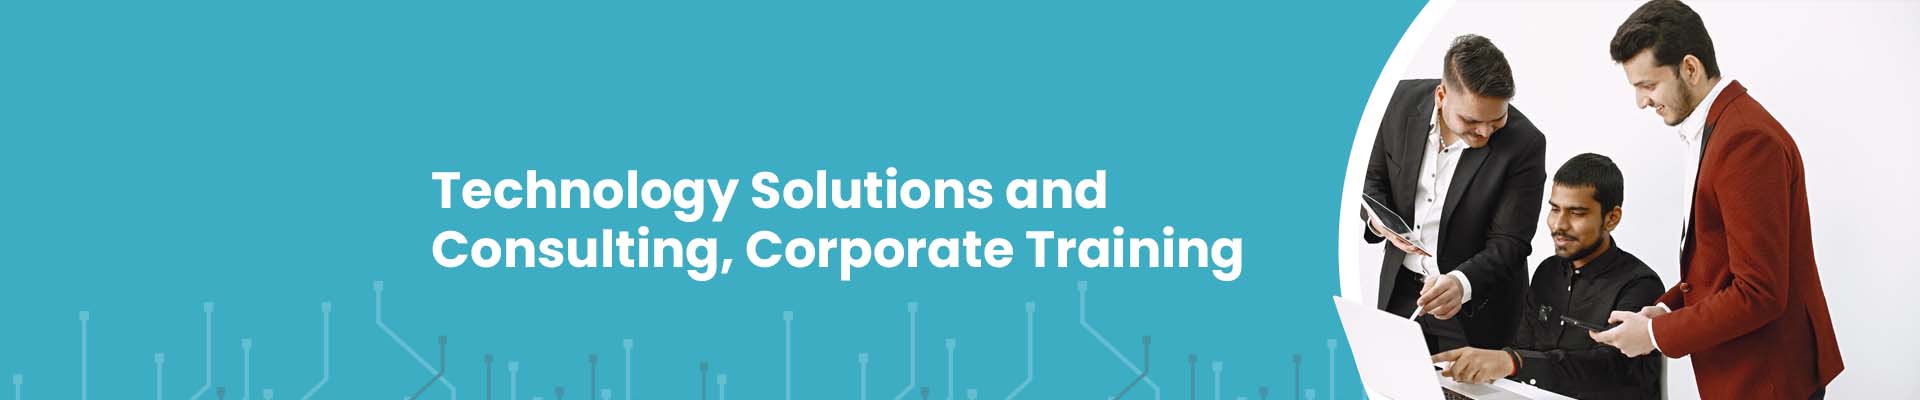 Technology Solutions and Consulting, Corporate Training